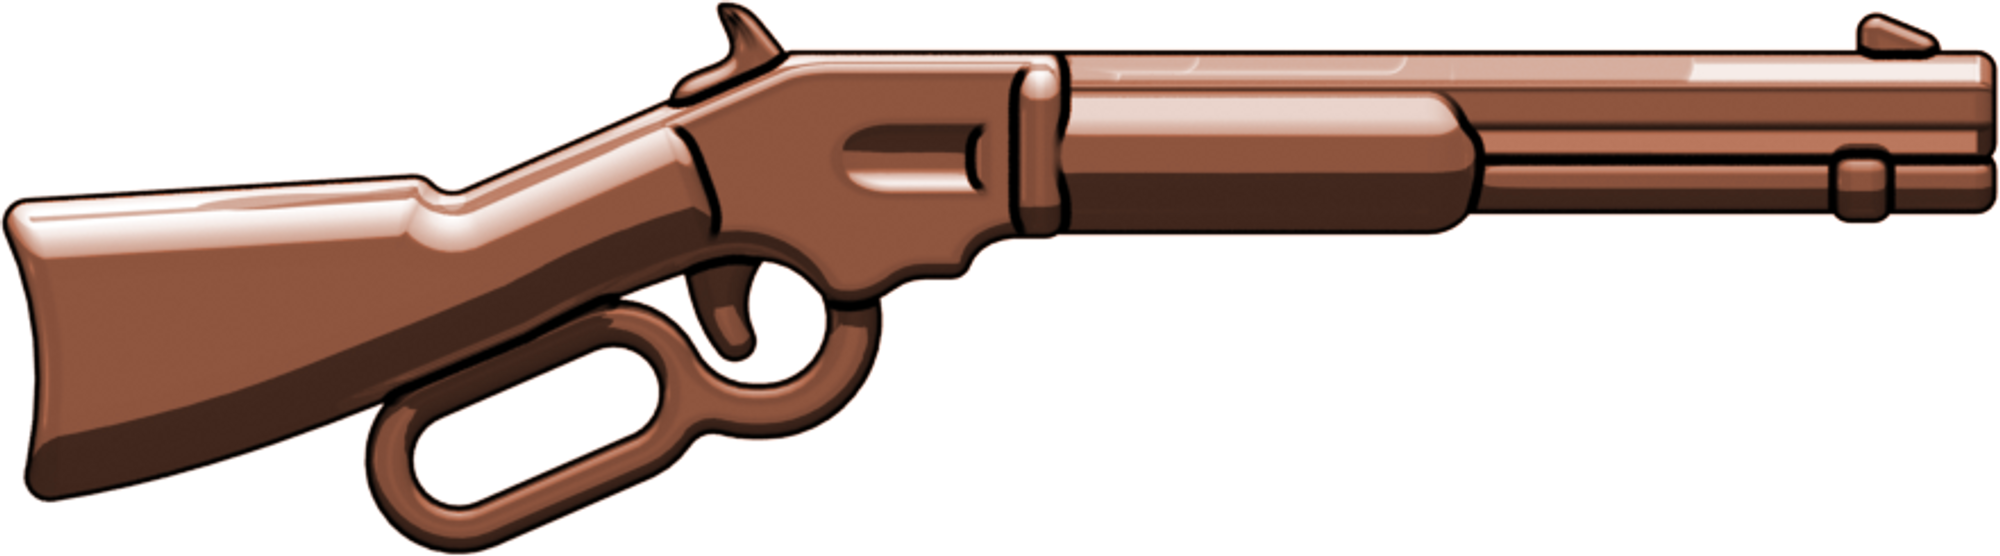 Lever-Action